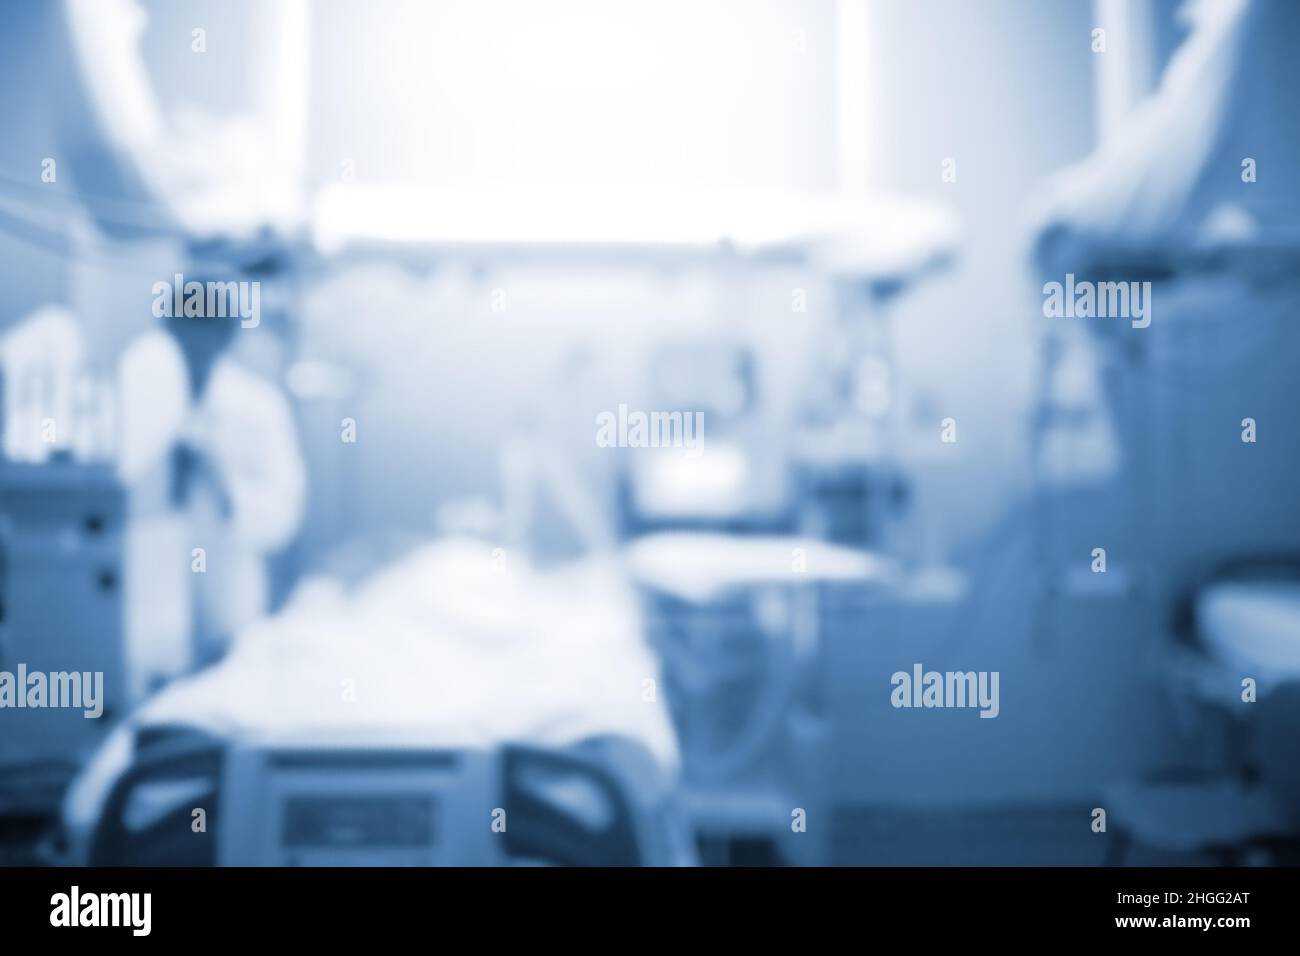 Male doctor figure next to the patient bed in the intensive care unit, unfocused background. Stock Photo